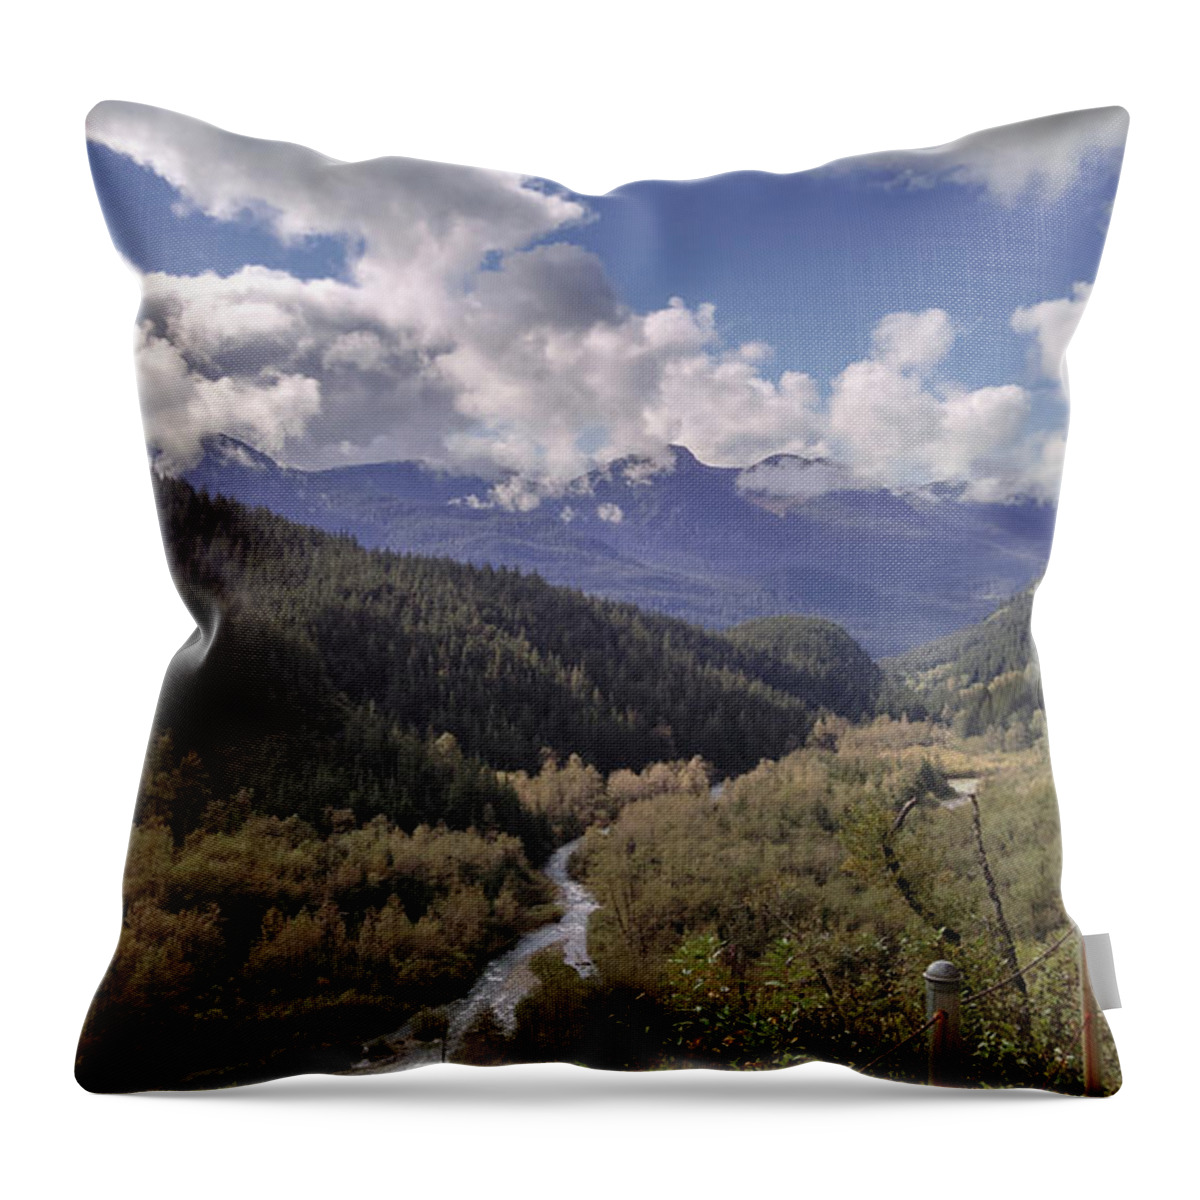 #alaska #juneau #ak #cruise #tours #vacation #peaceful #perseverance #clouds #cloudy #hiking Throw Pillow featuring the photograph Perseverence by Charles Vice